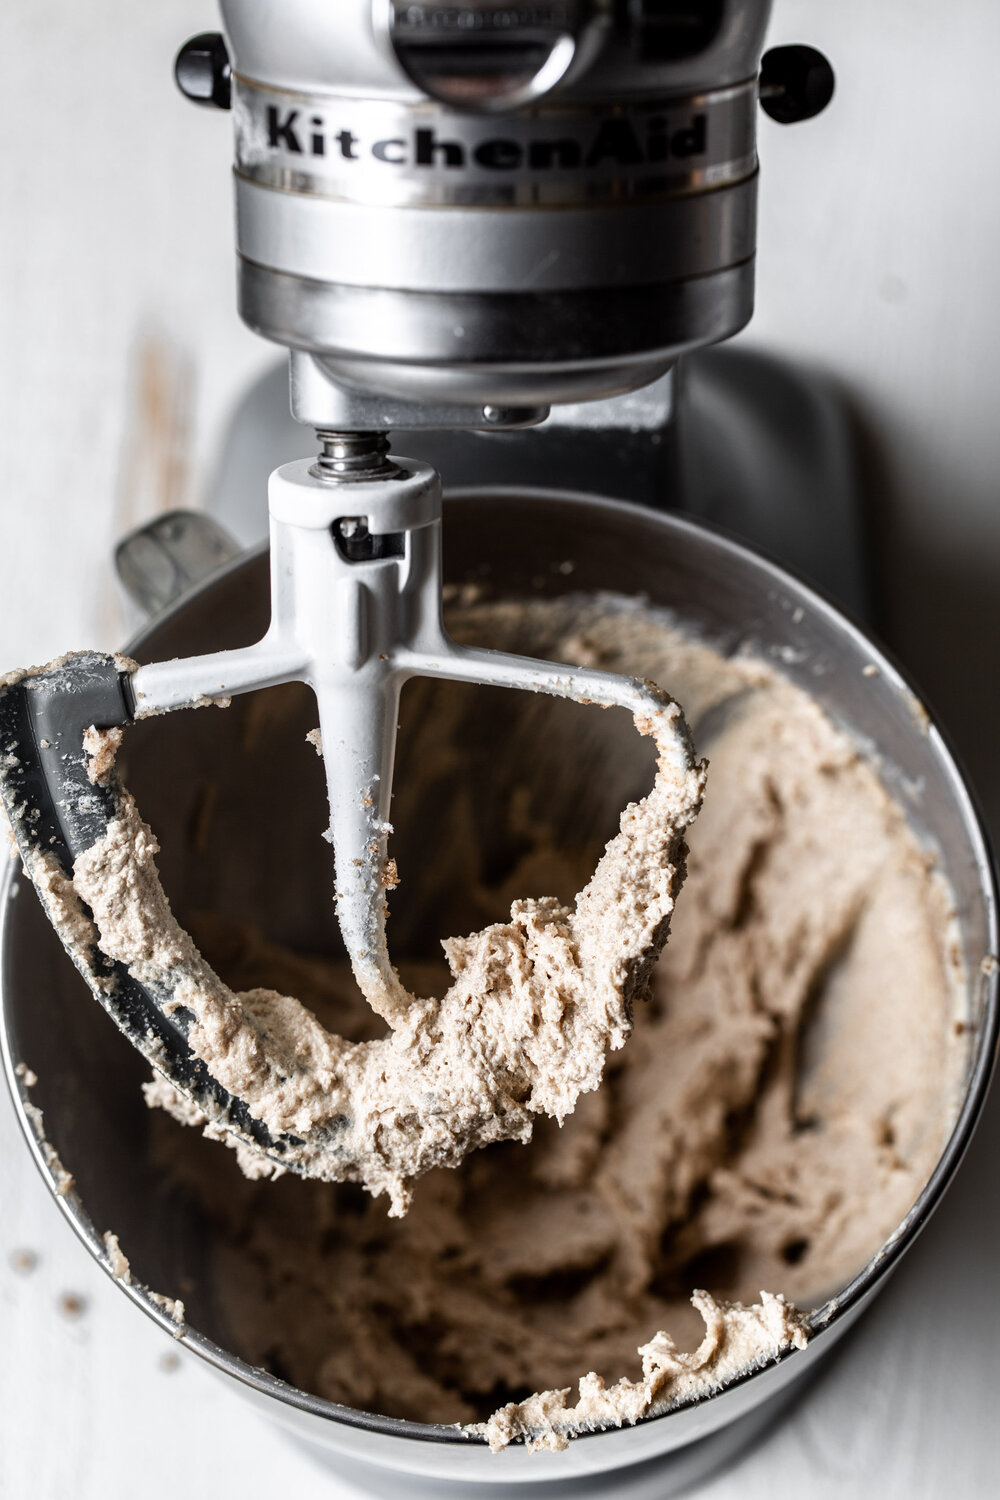 beat sugar and butter in stand mixer